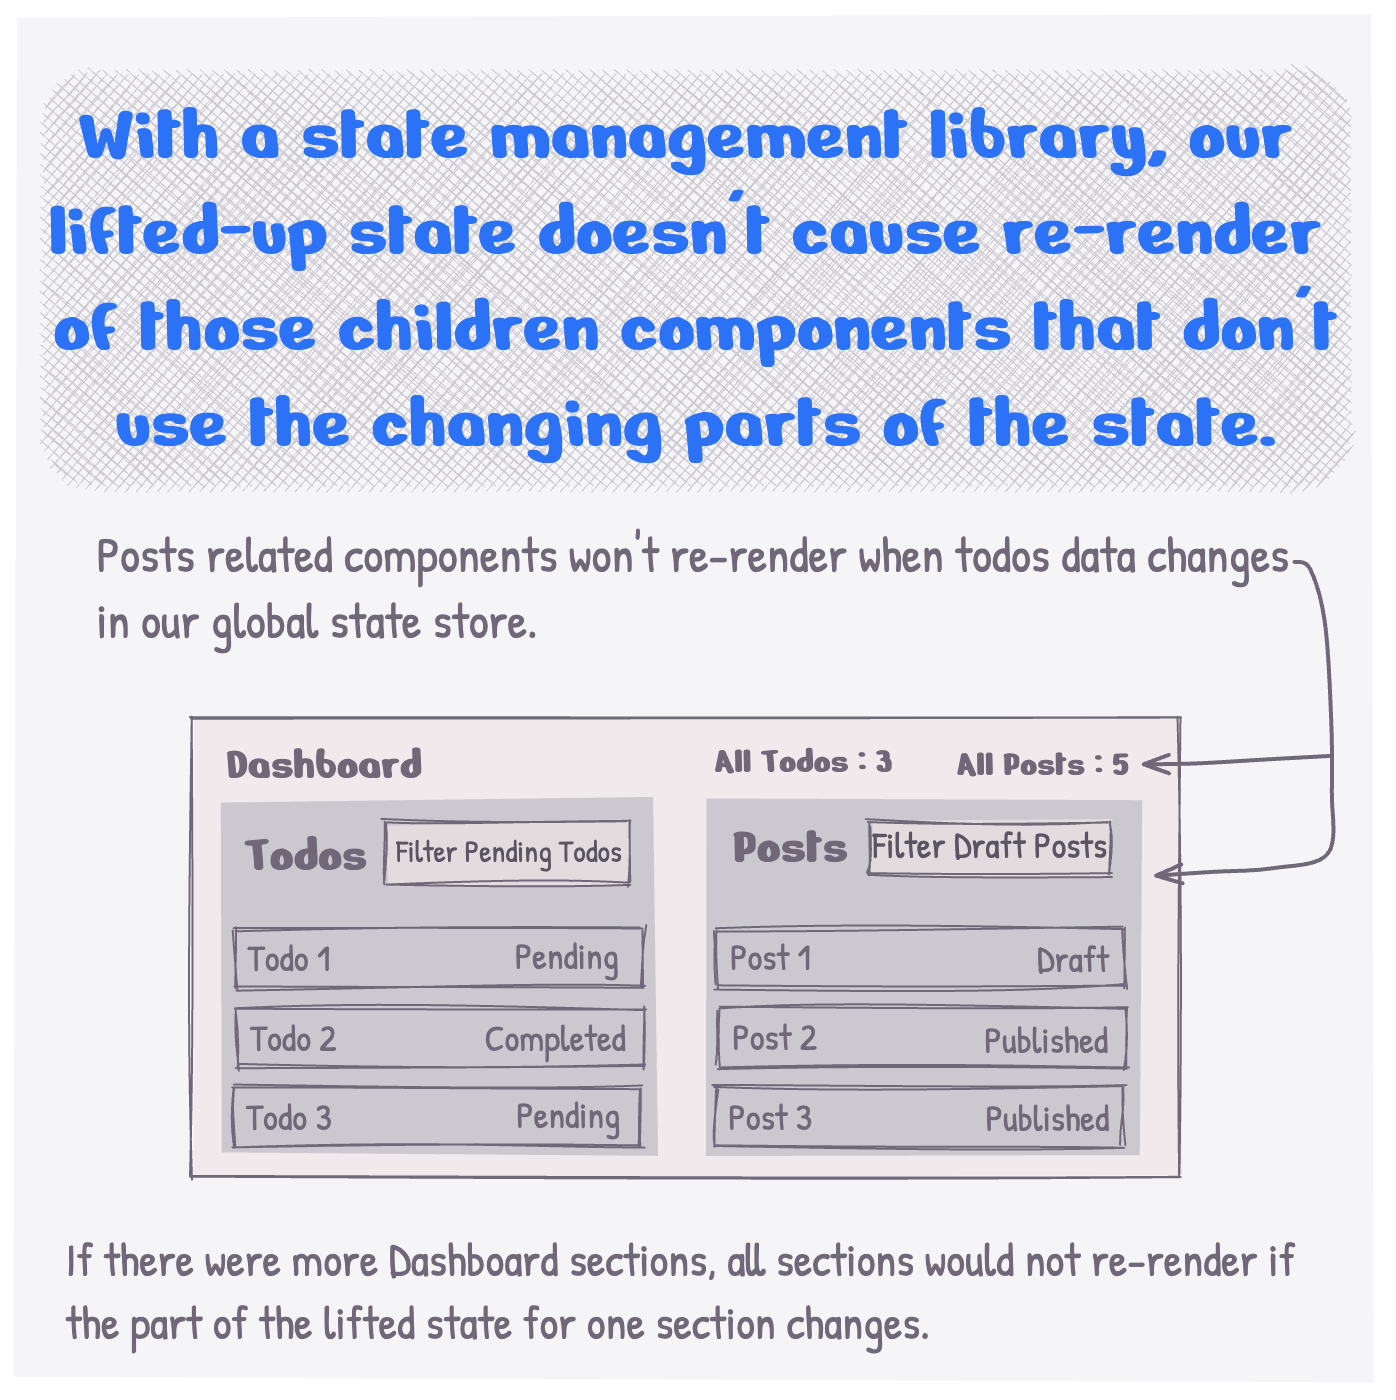 With a state management library, our lifted up state doesn't cause re-render of those children components that don't use the changing parts of the state.